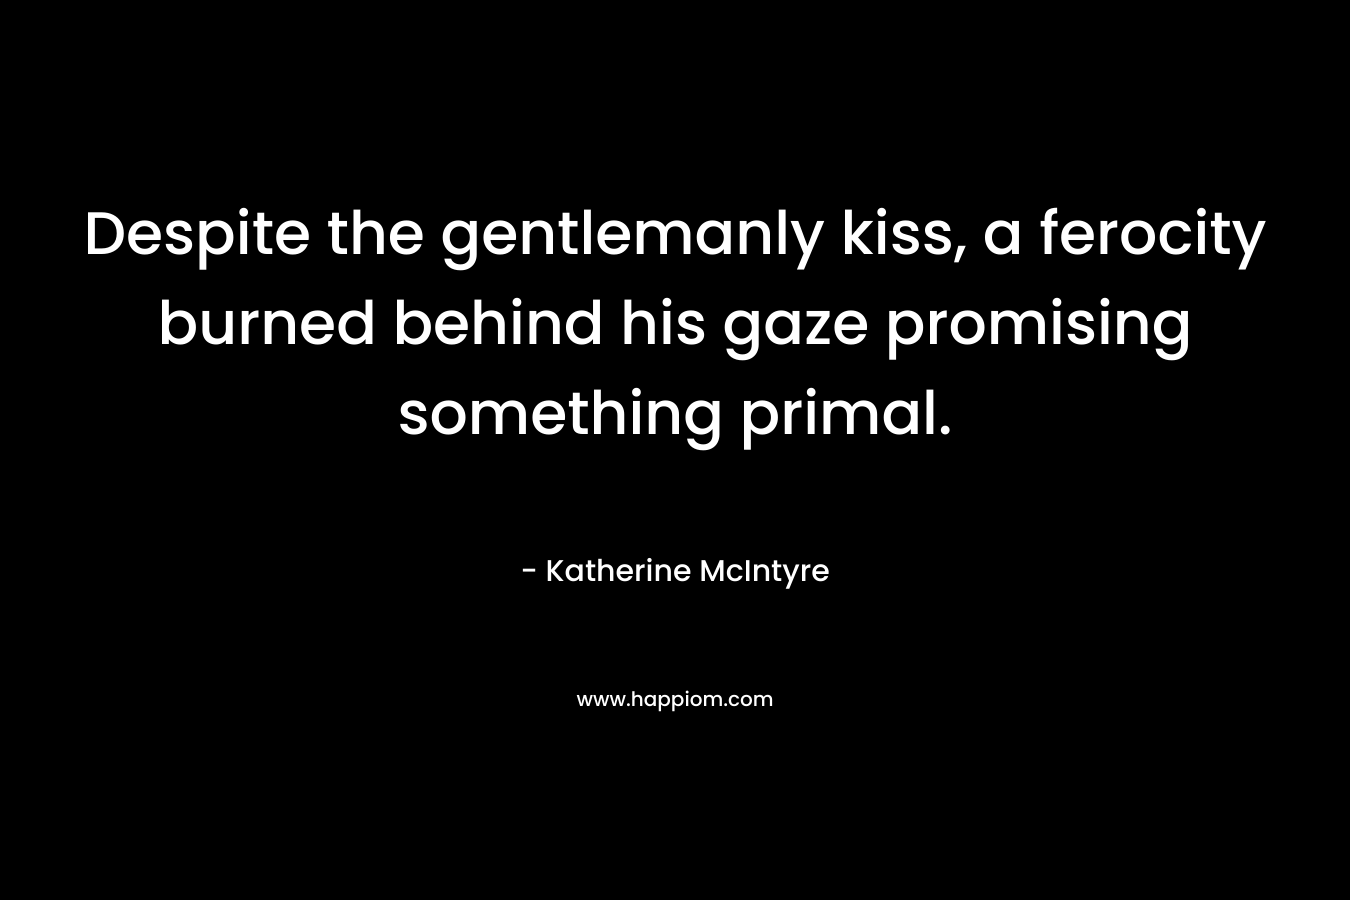 Despite the gentlemanly kiss, a ferocity burned behind his gaze promising something primal.